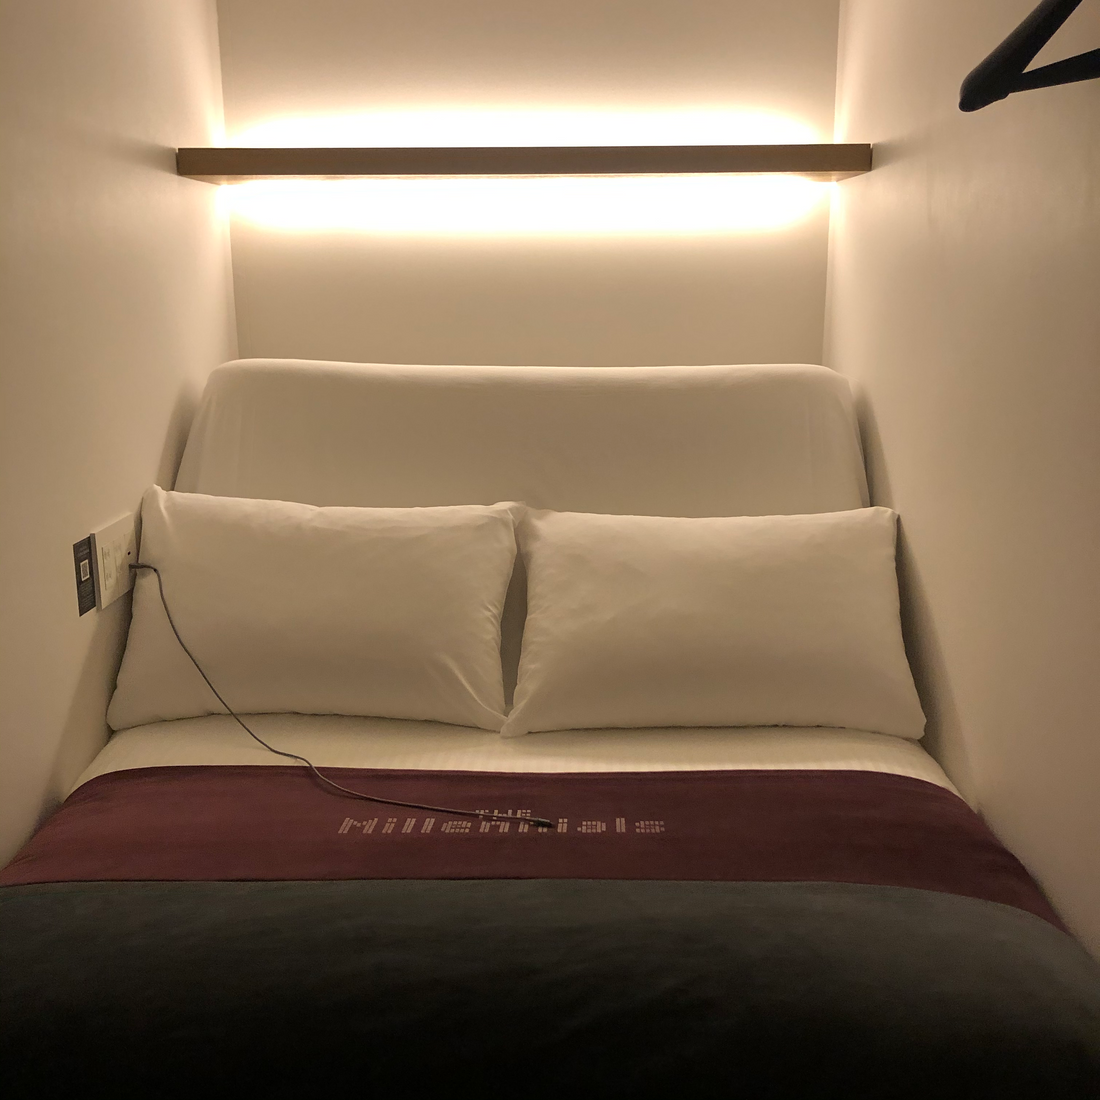 My Stay at the Tokyo Capsule Hotel